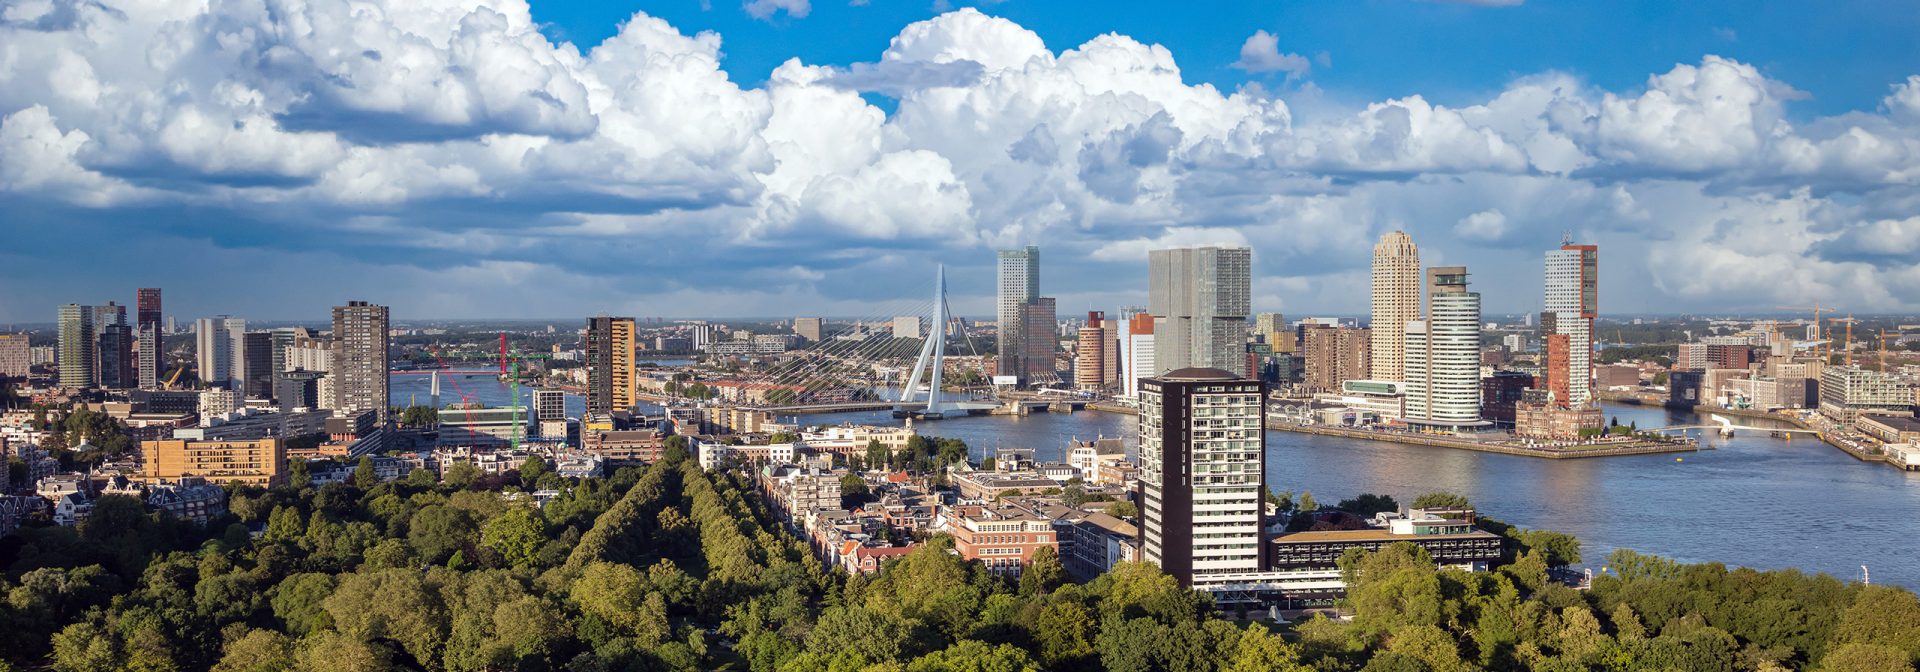 Rotterdam Netherlands cityscape and Erasmus bridge. Panoramic view from Euromast tower, sunny day	